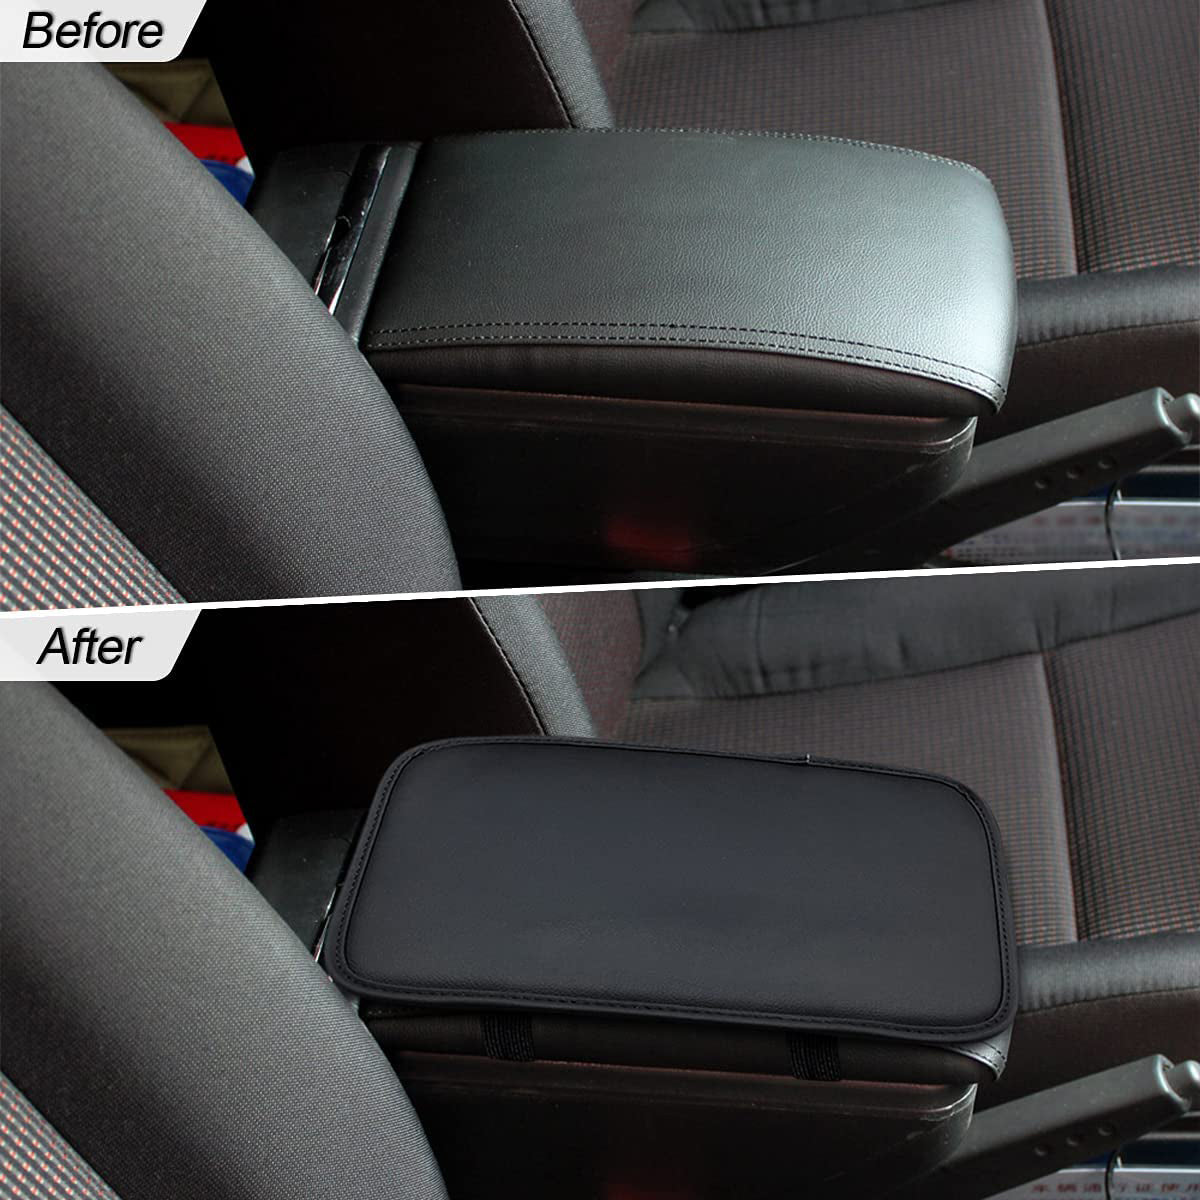 Leather Center Console Cushion Pad, Custom Fit For Your Cars, Waterproof Armrest Seat Box Cover Fit, Car Interior Protection Accessories, Car Accessories FJ13991